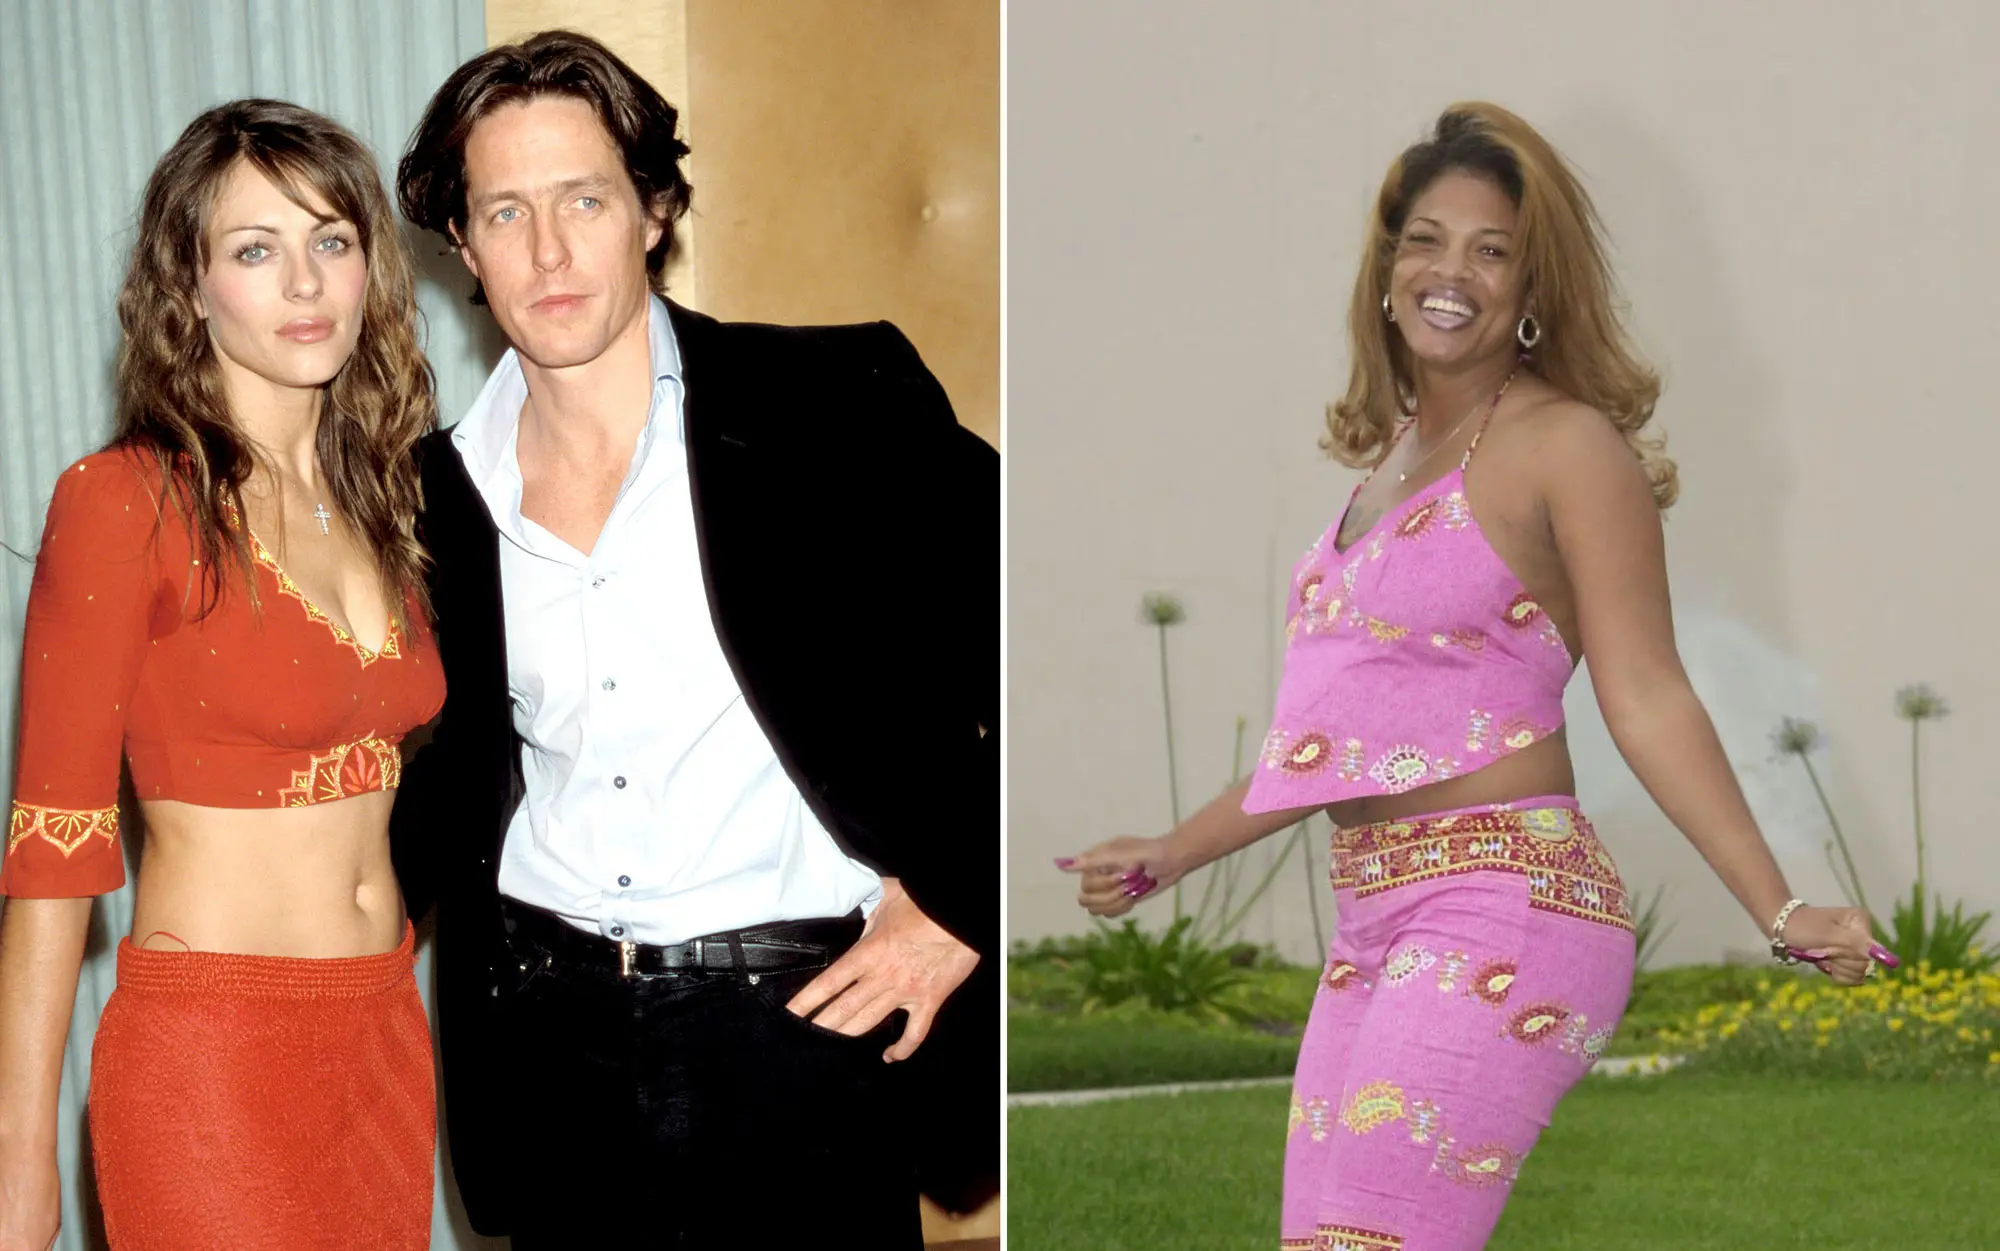 Left: Hugh Grant with Liz Hurley
Right: The Prostitute he was found with